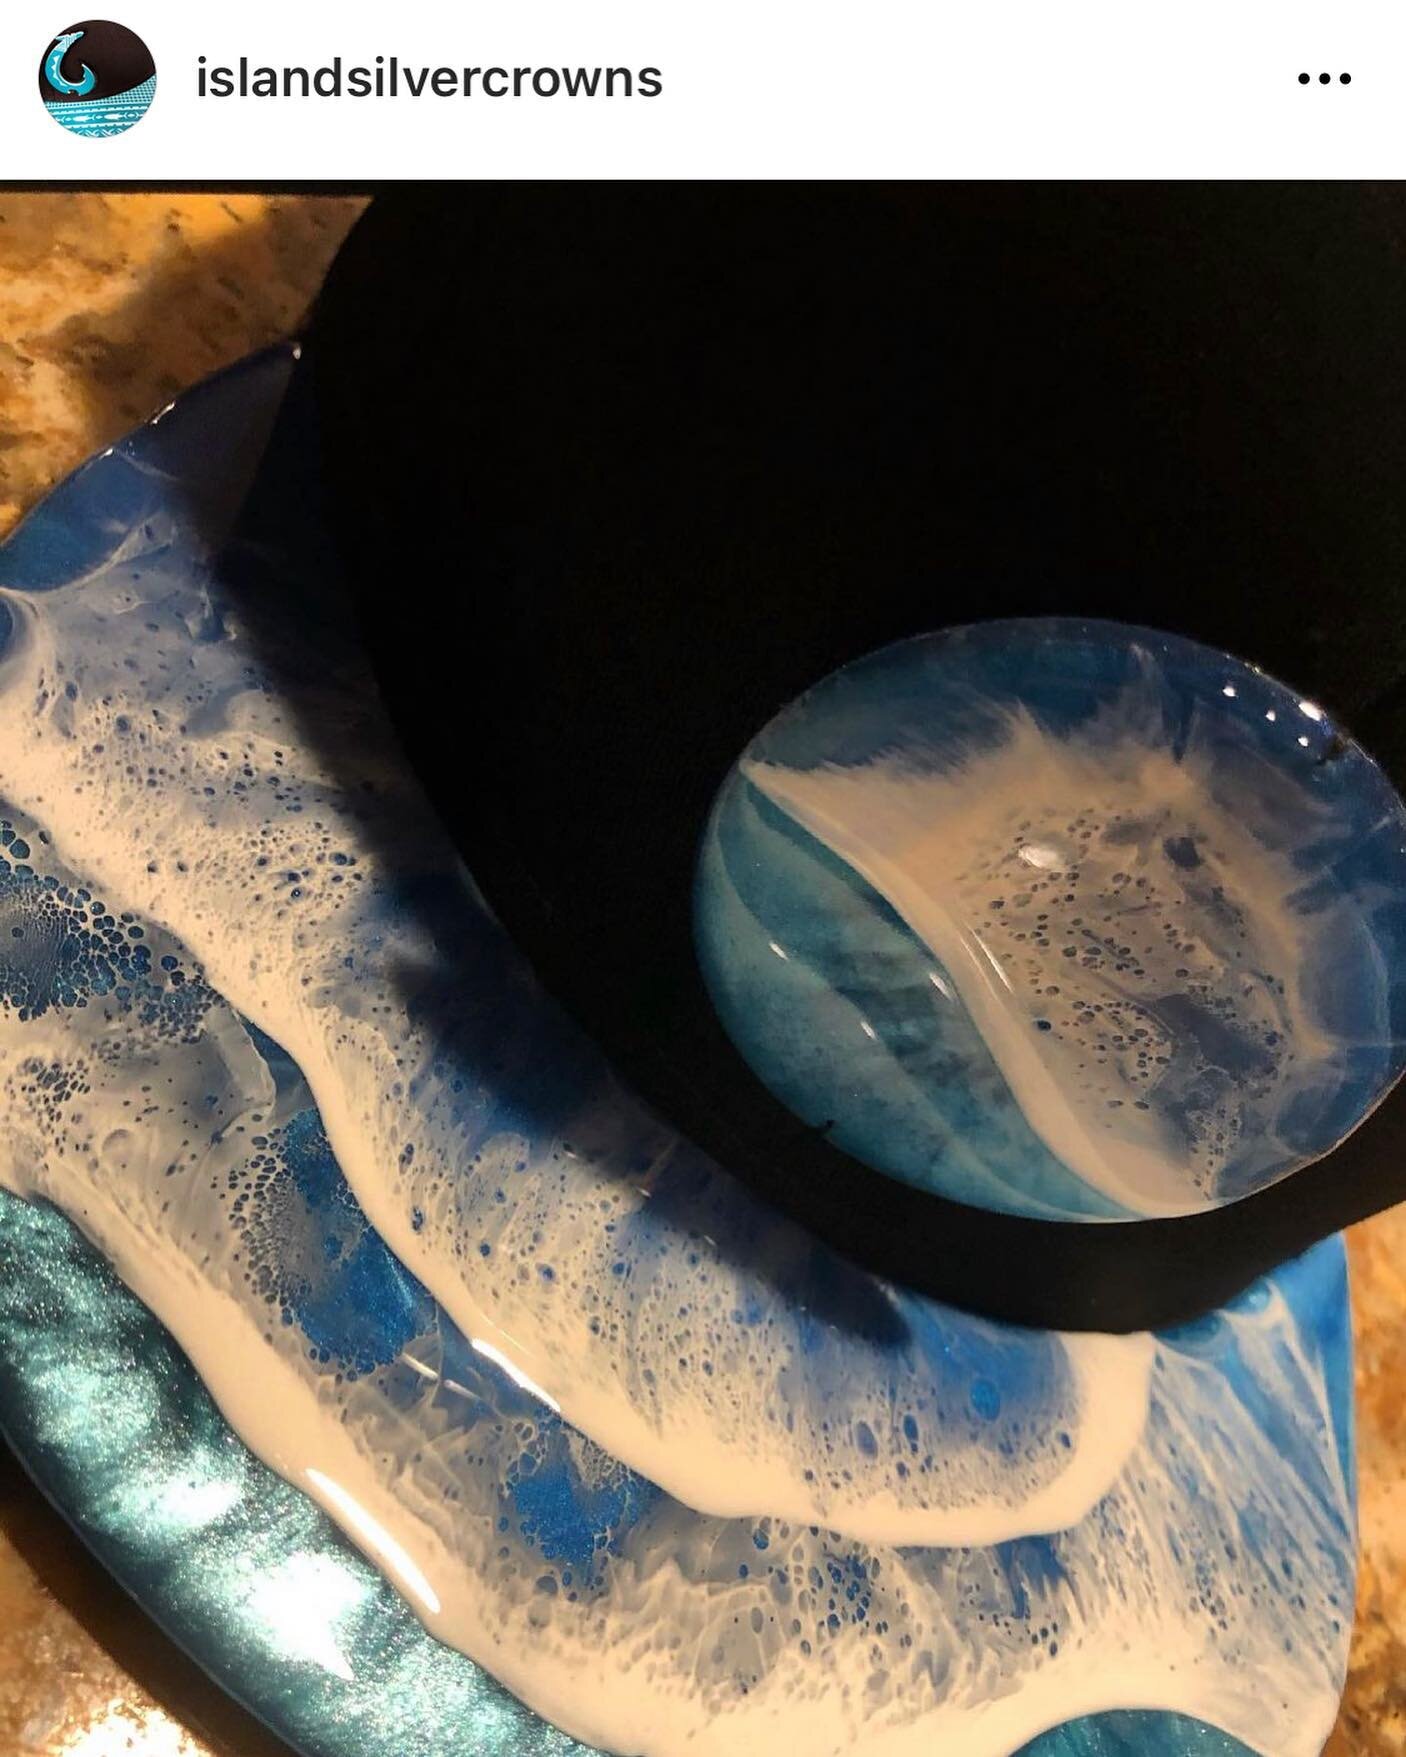 @islandsilvercrowns is doing a giveaway with this double wave crown! Two tone epoxy waves right on the bill! Go check out his page and read the rules in the post for your chance to win!  #waikiki #honolulu #hatporn #hatcollection #hatcollector #hats 